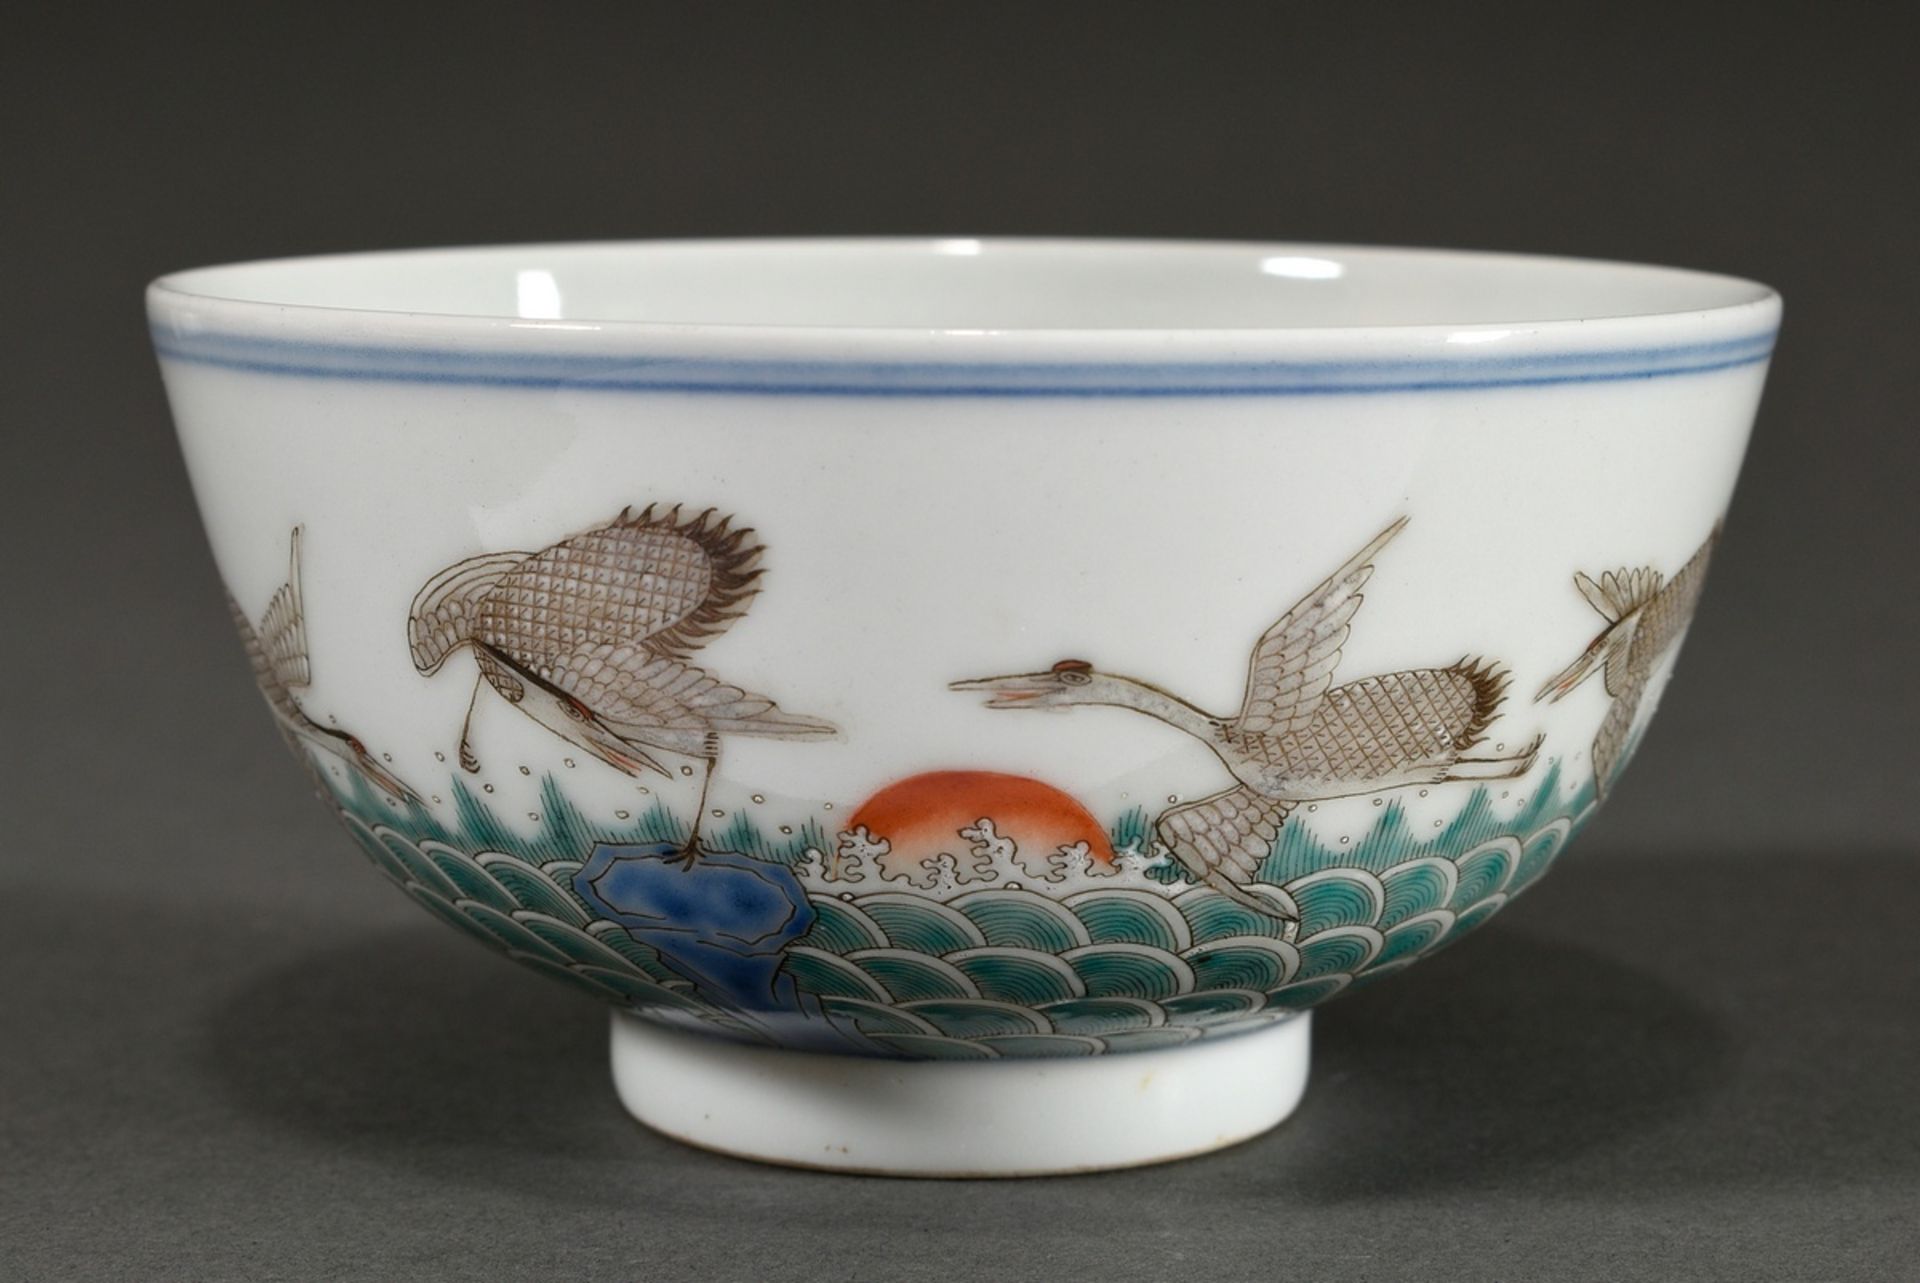 Kumm with fine polychrome painting "Eight cranes over waves in the sunset", China 1851-1861, Xianfe